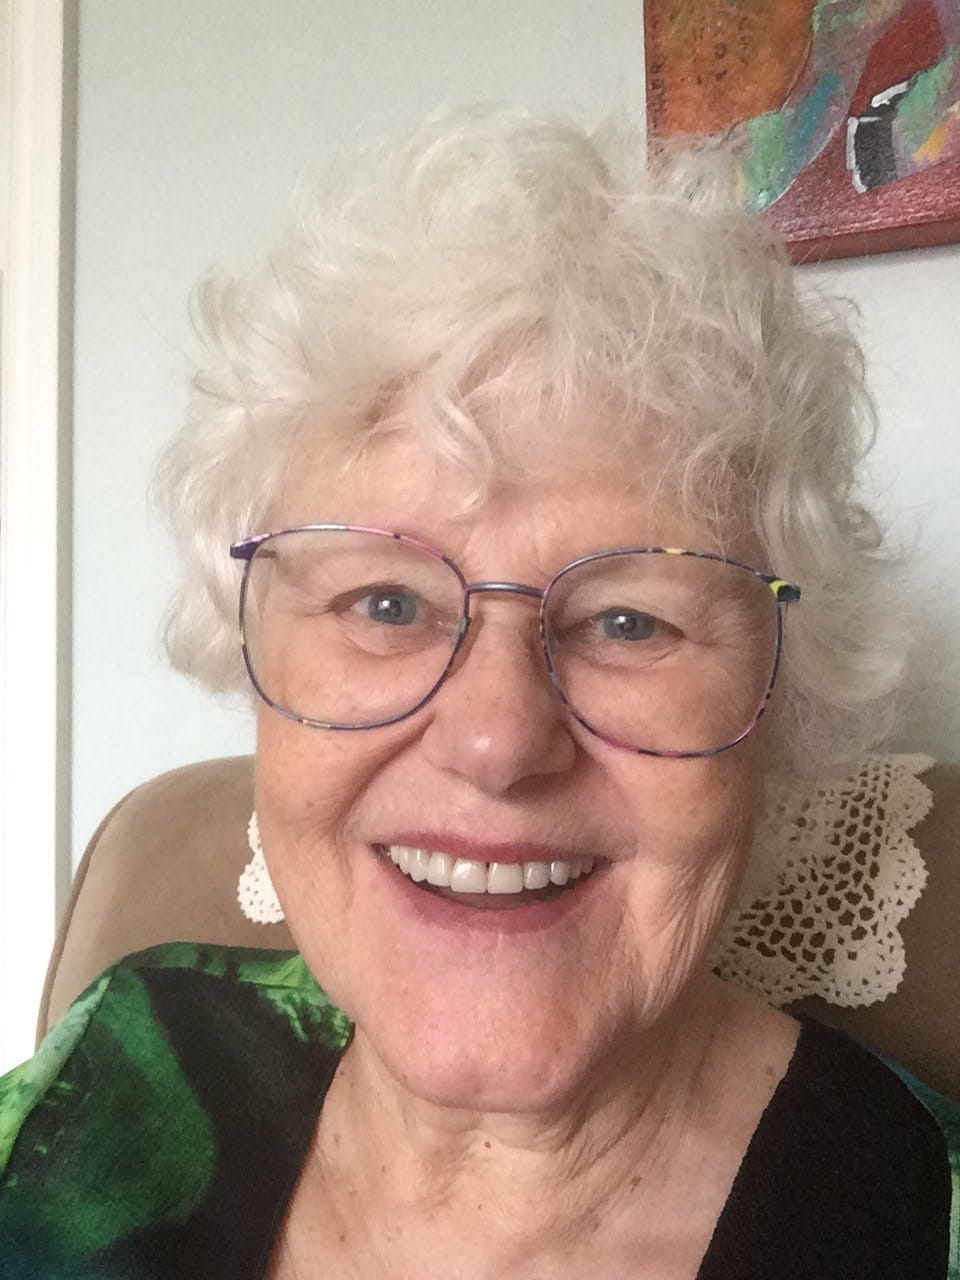 A senior woman with glasses and curly hair smiles brightly for the camera